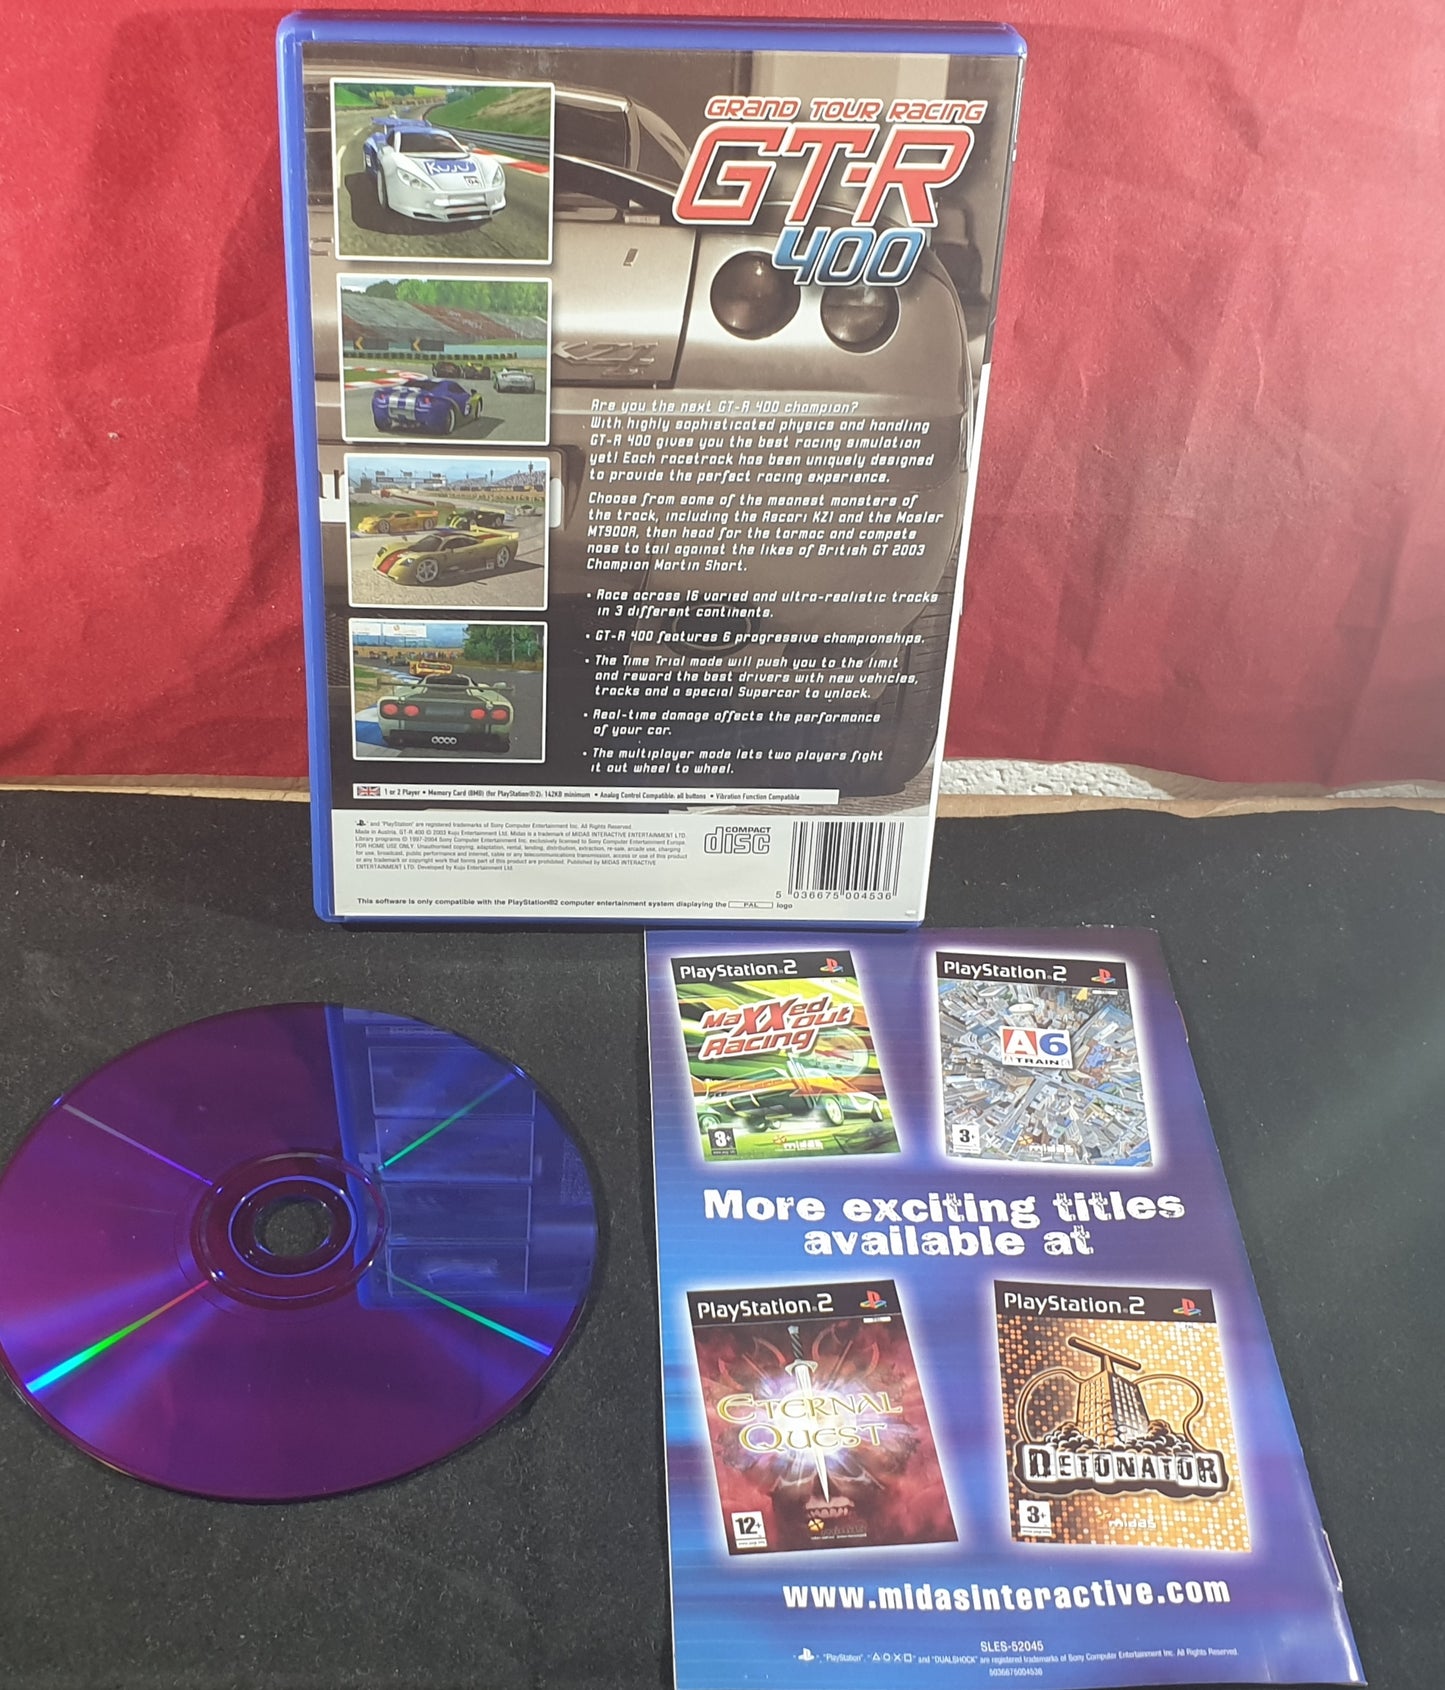 GT-R 400 Sony Playstation 2 (PS2) Game